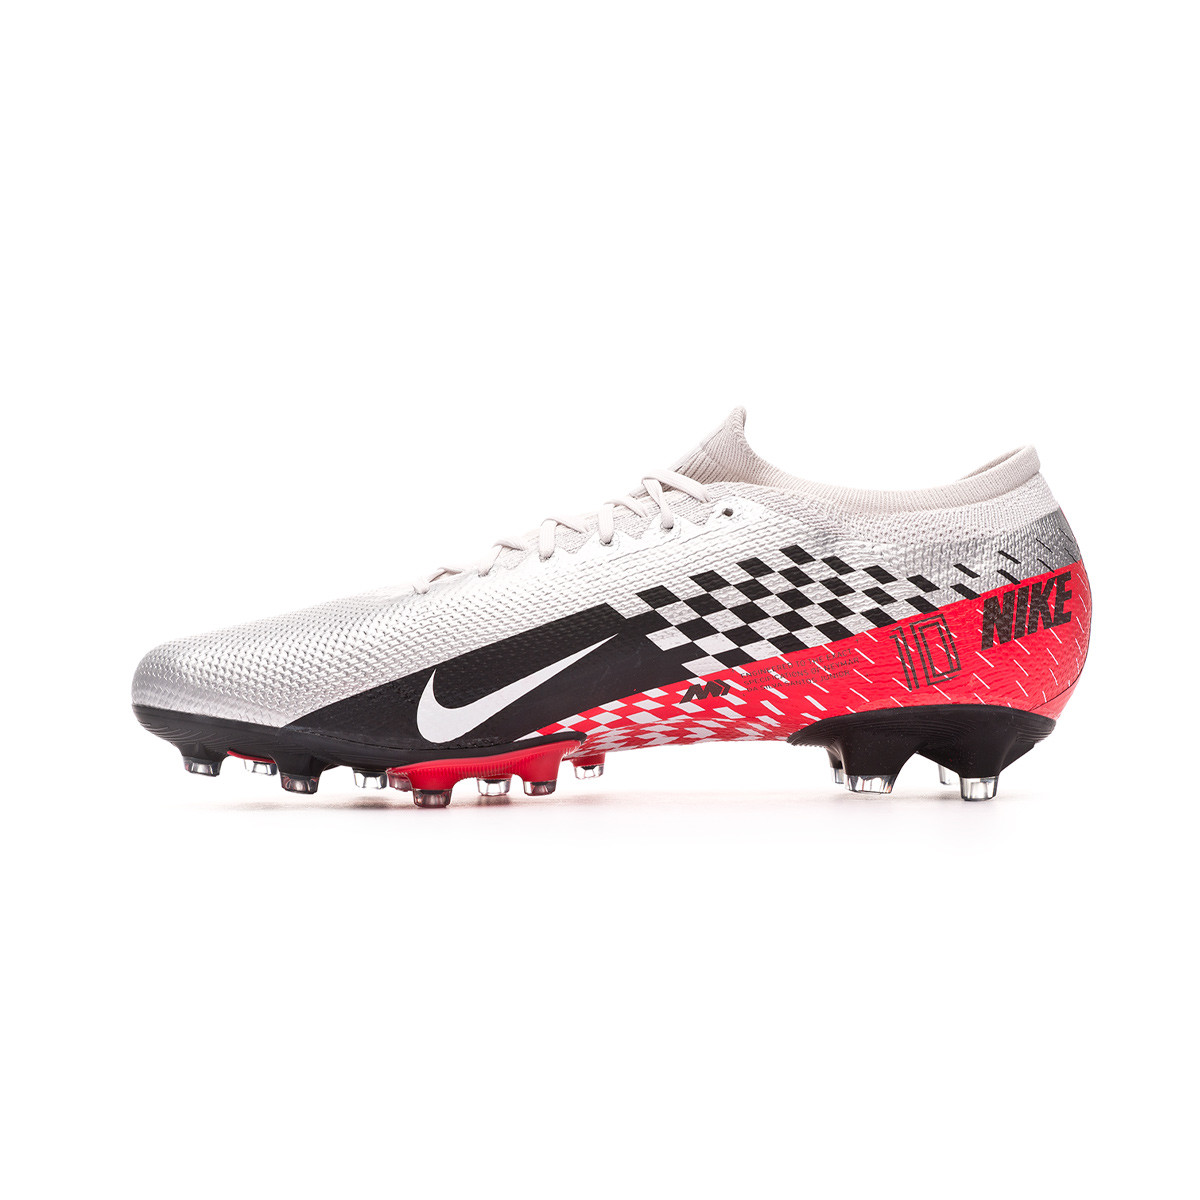 Nike Mercurial Vapor 13 Future DNA Get all the details at.